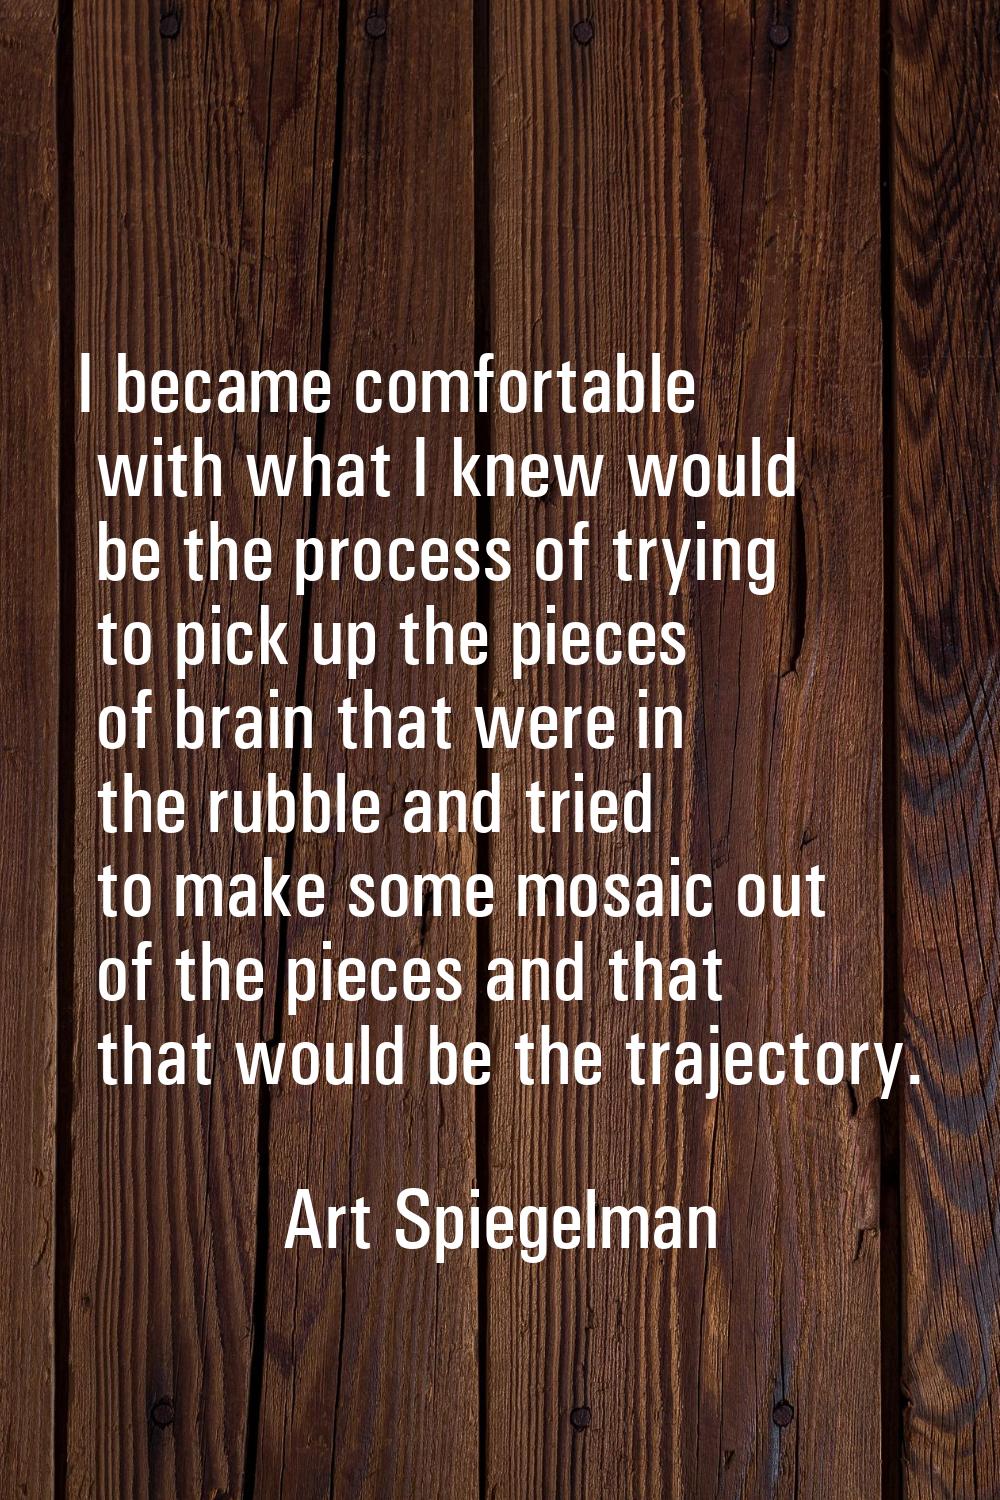 I became comfortable with what I knew would be the process of trying to pick up the pieces of brain